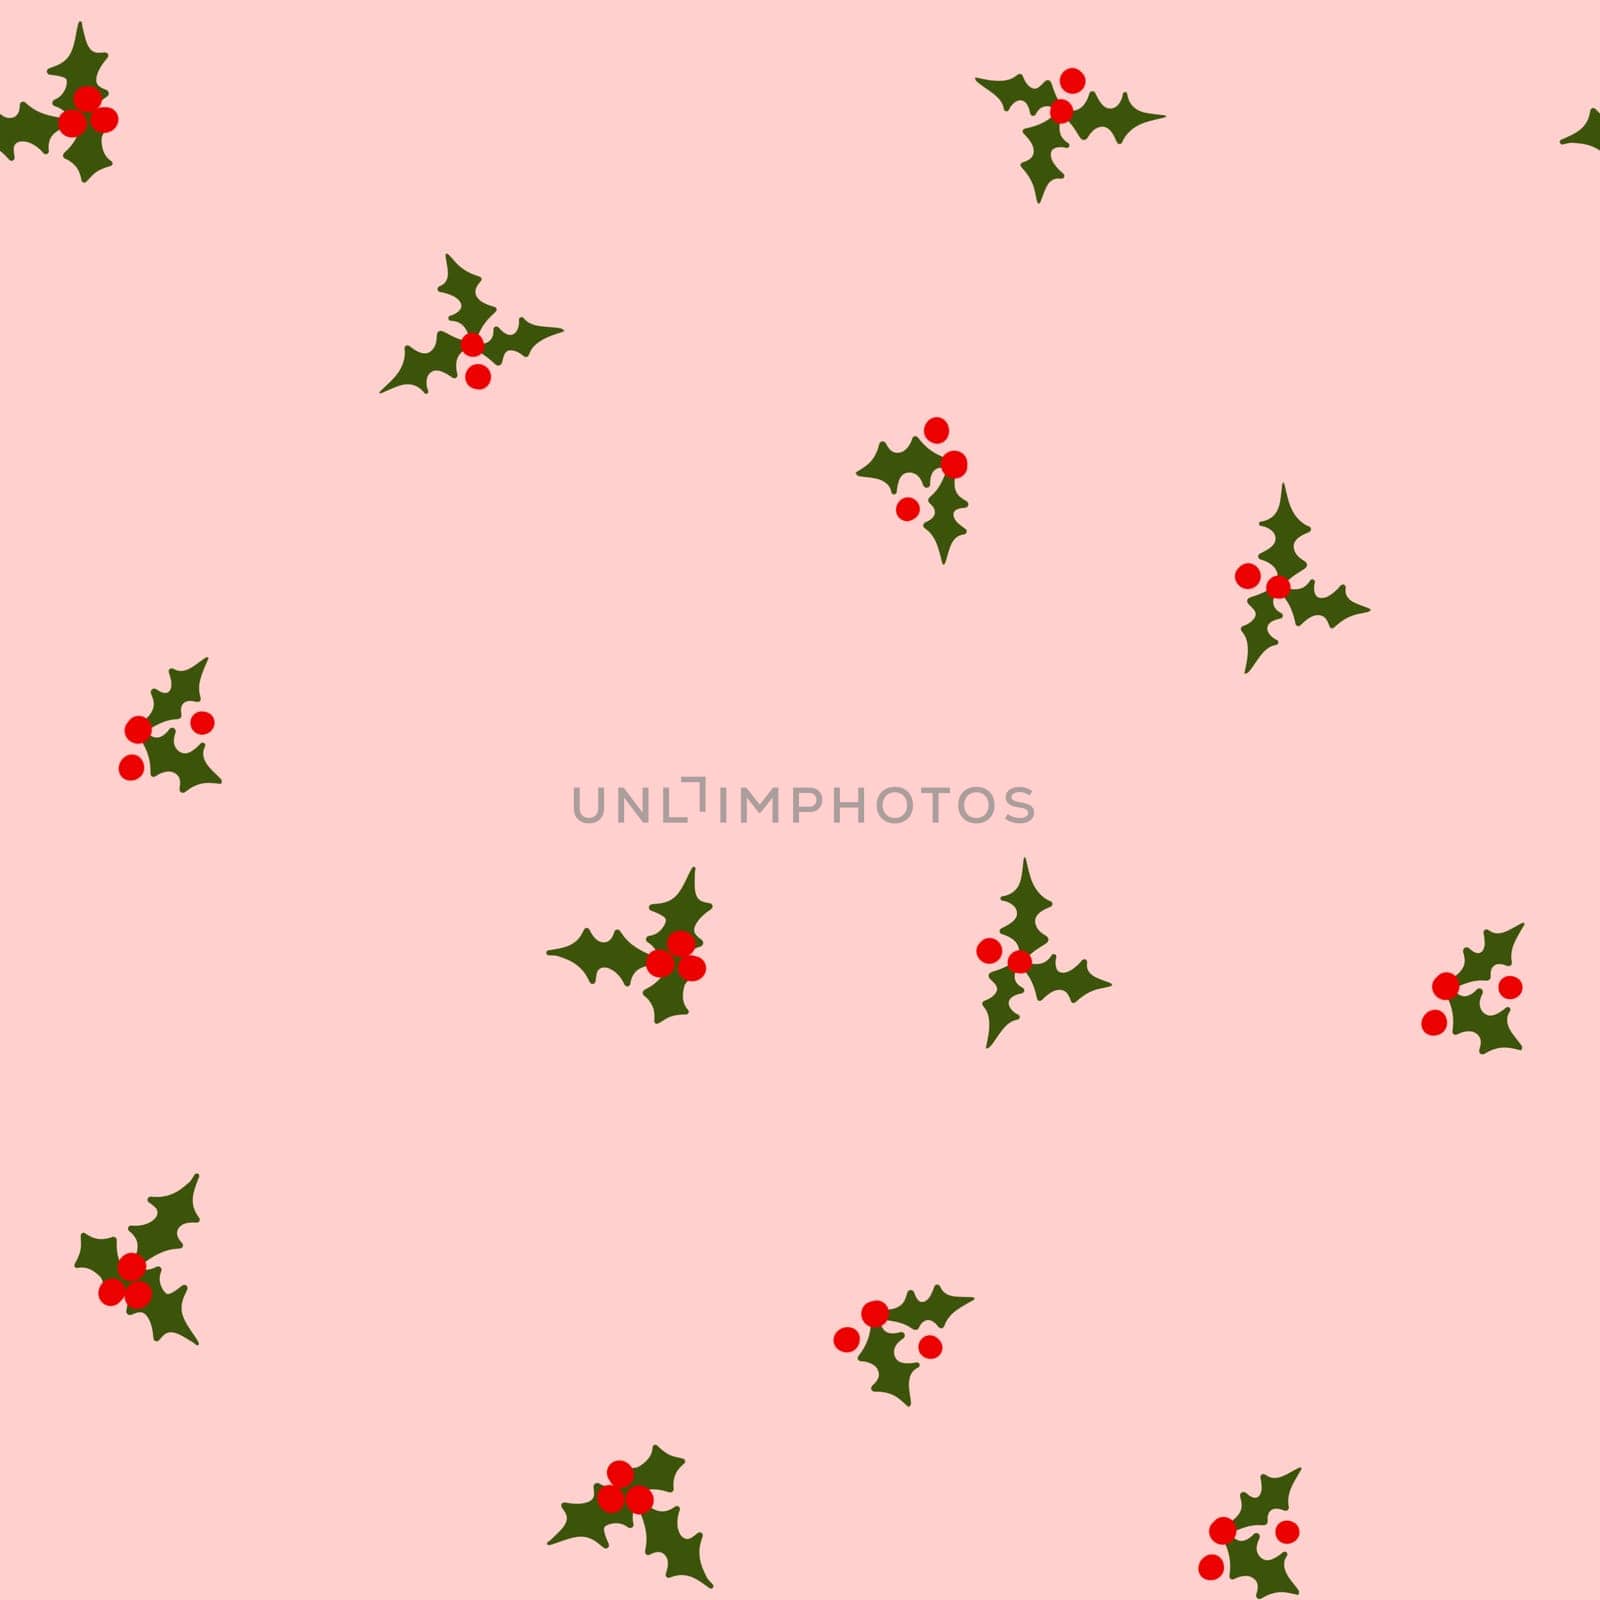 Hand drawn seamless pattern with Christmas winter elements in red green pink, small ditsy traditional retro vintage holly holiday plant design on white background. Bright colorful print for celebration. by Lagmar